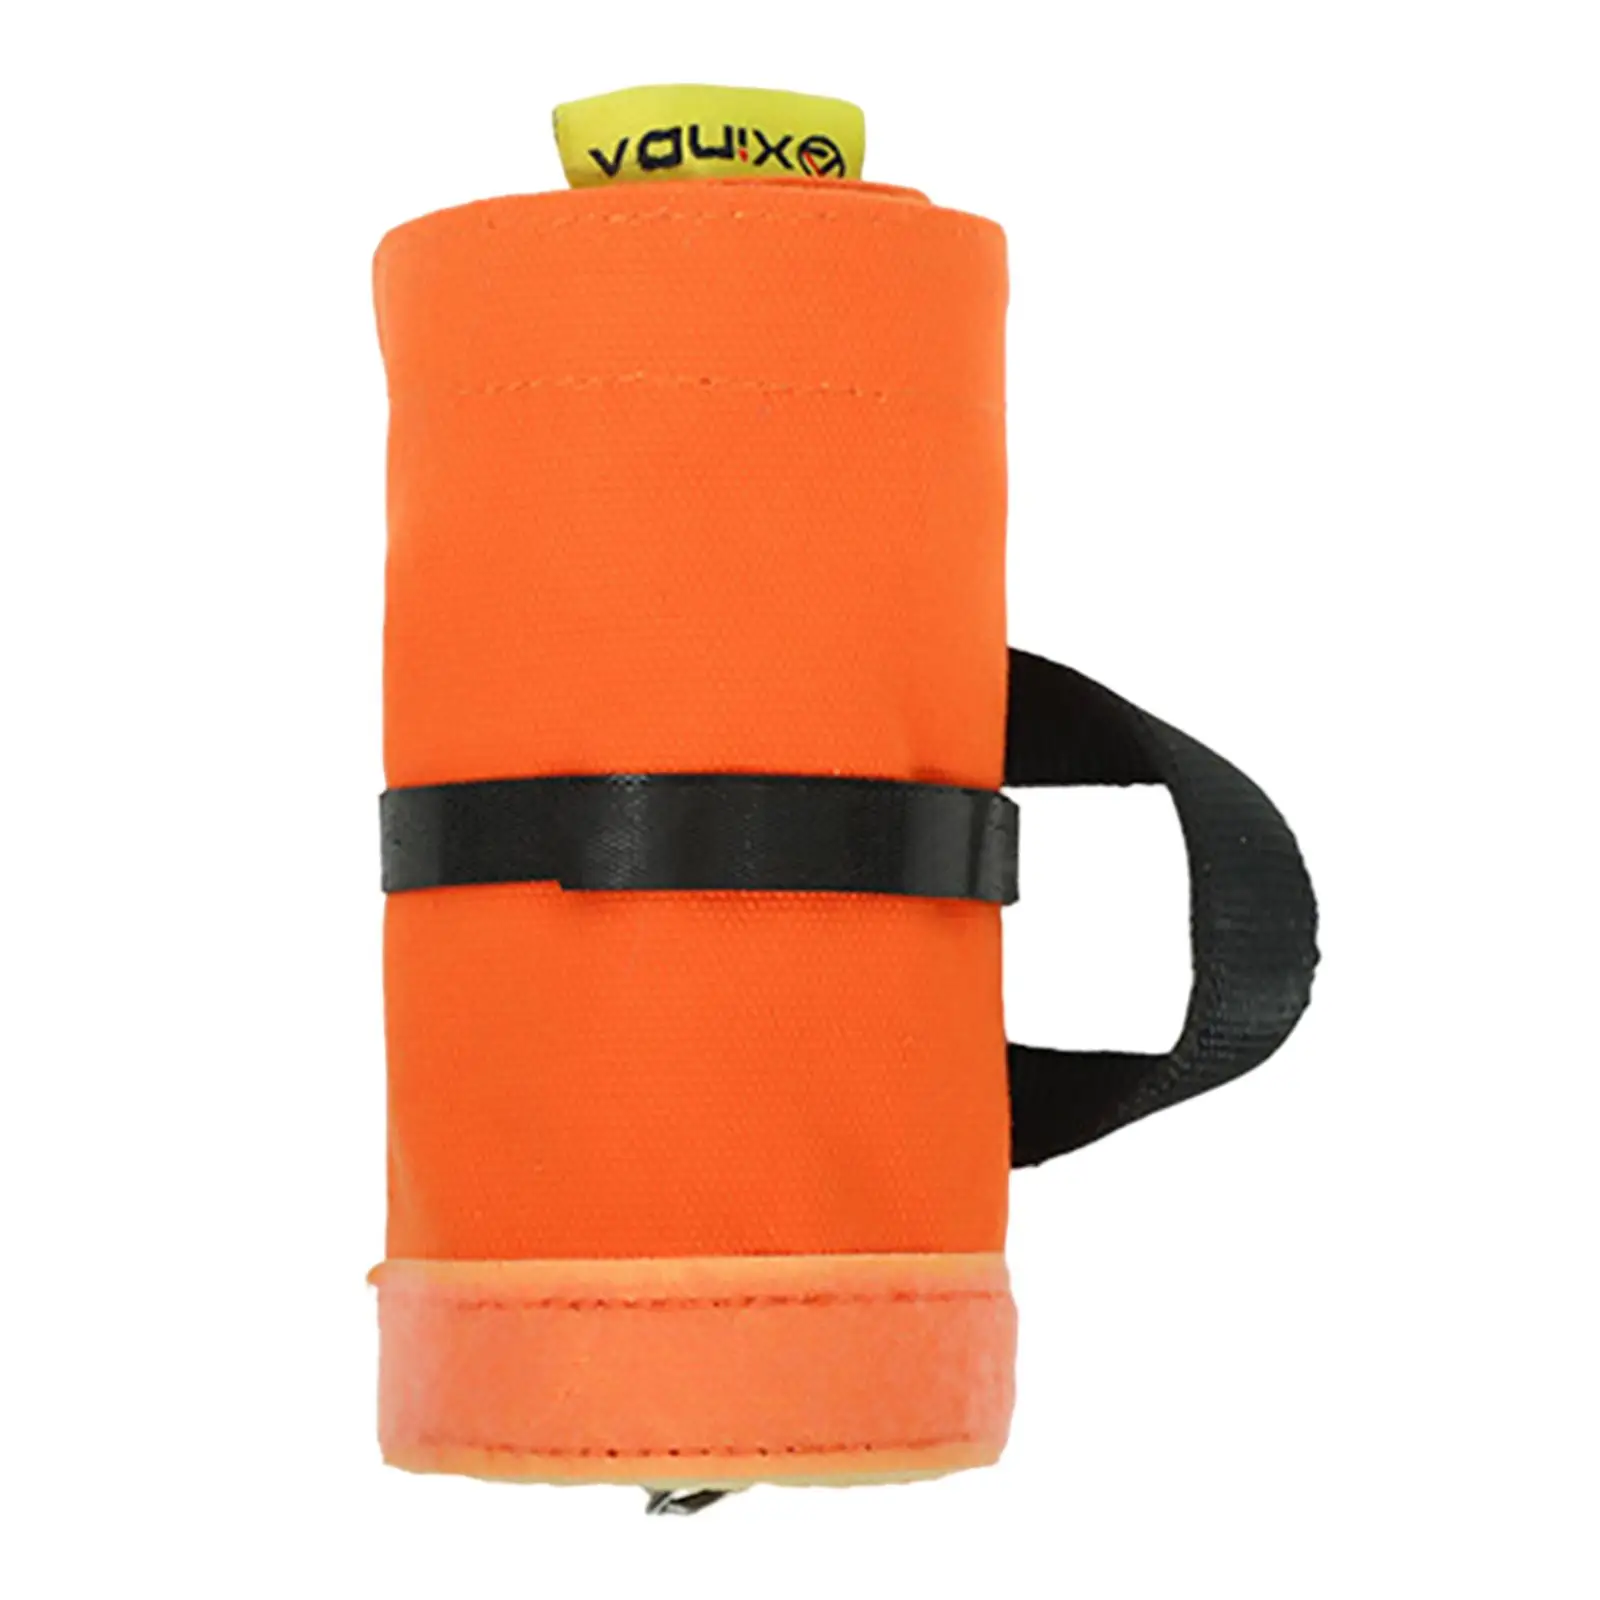 Rope Protector Rope Protective Sleeve Rope Sheath for Outdoor Mountaineering